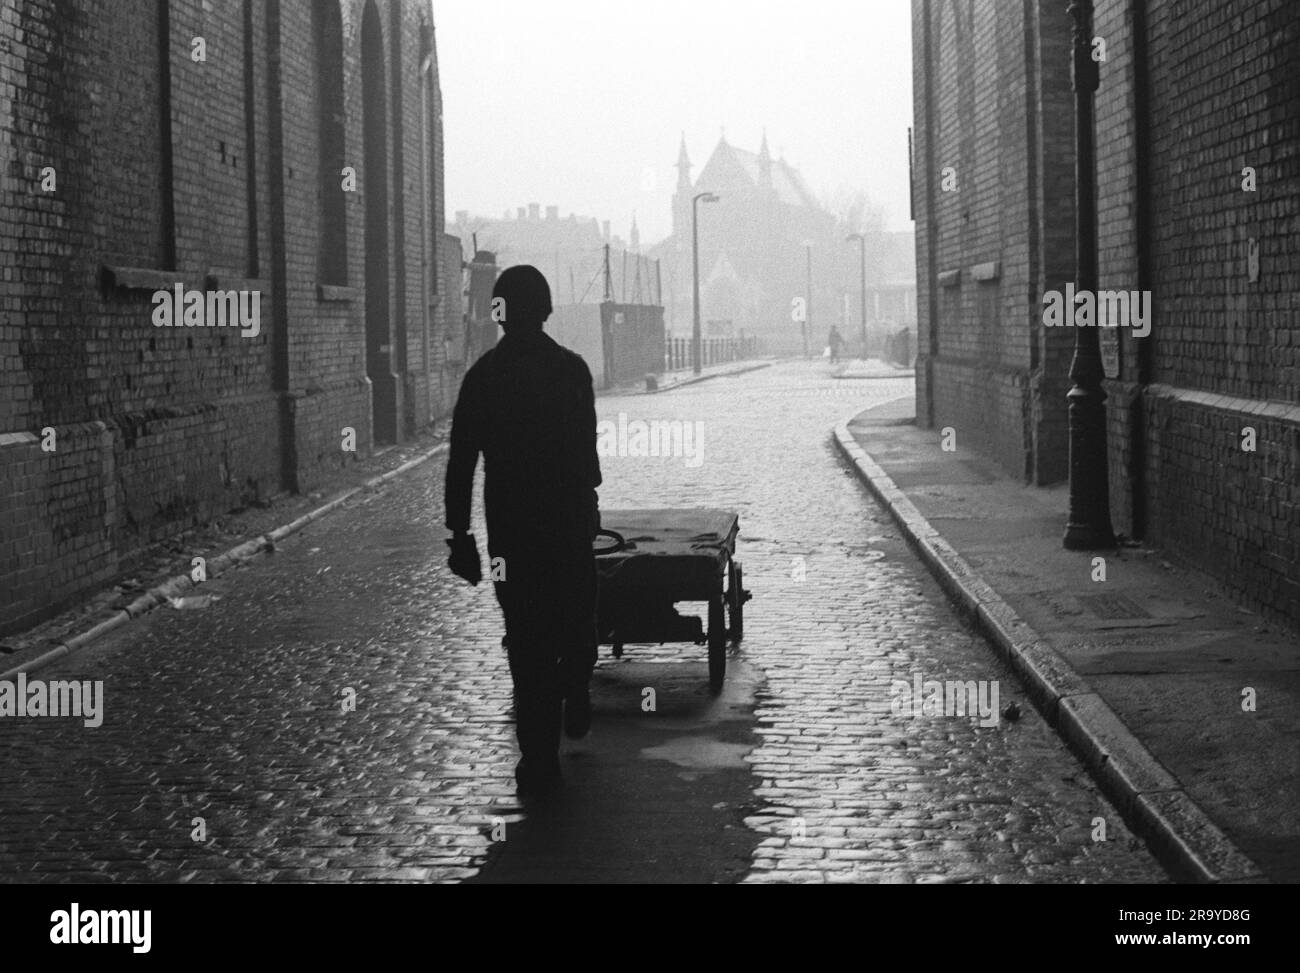 Whitechapel East London 1970s. Working class man pulls a handcart along the cobbled street past huge windowless warehouses. In the distance is St Annes Church. the area has been completely redeveloped. Tower Hamlets, London, England circa 1974 70s UK HOMER SYKES Stock Photo